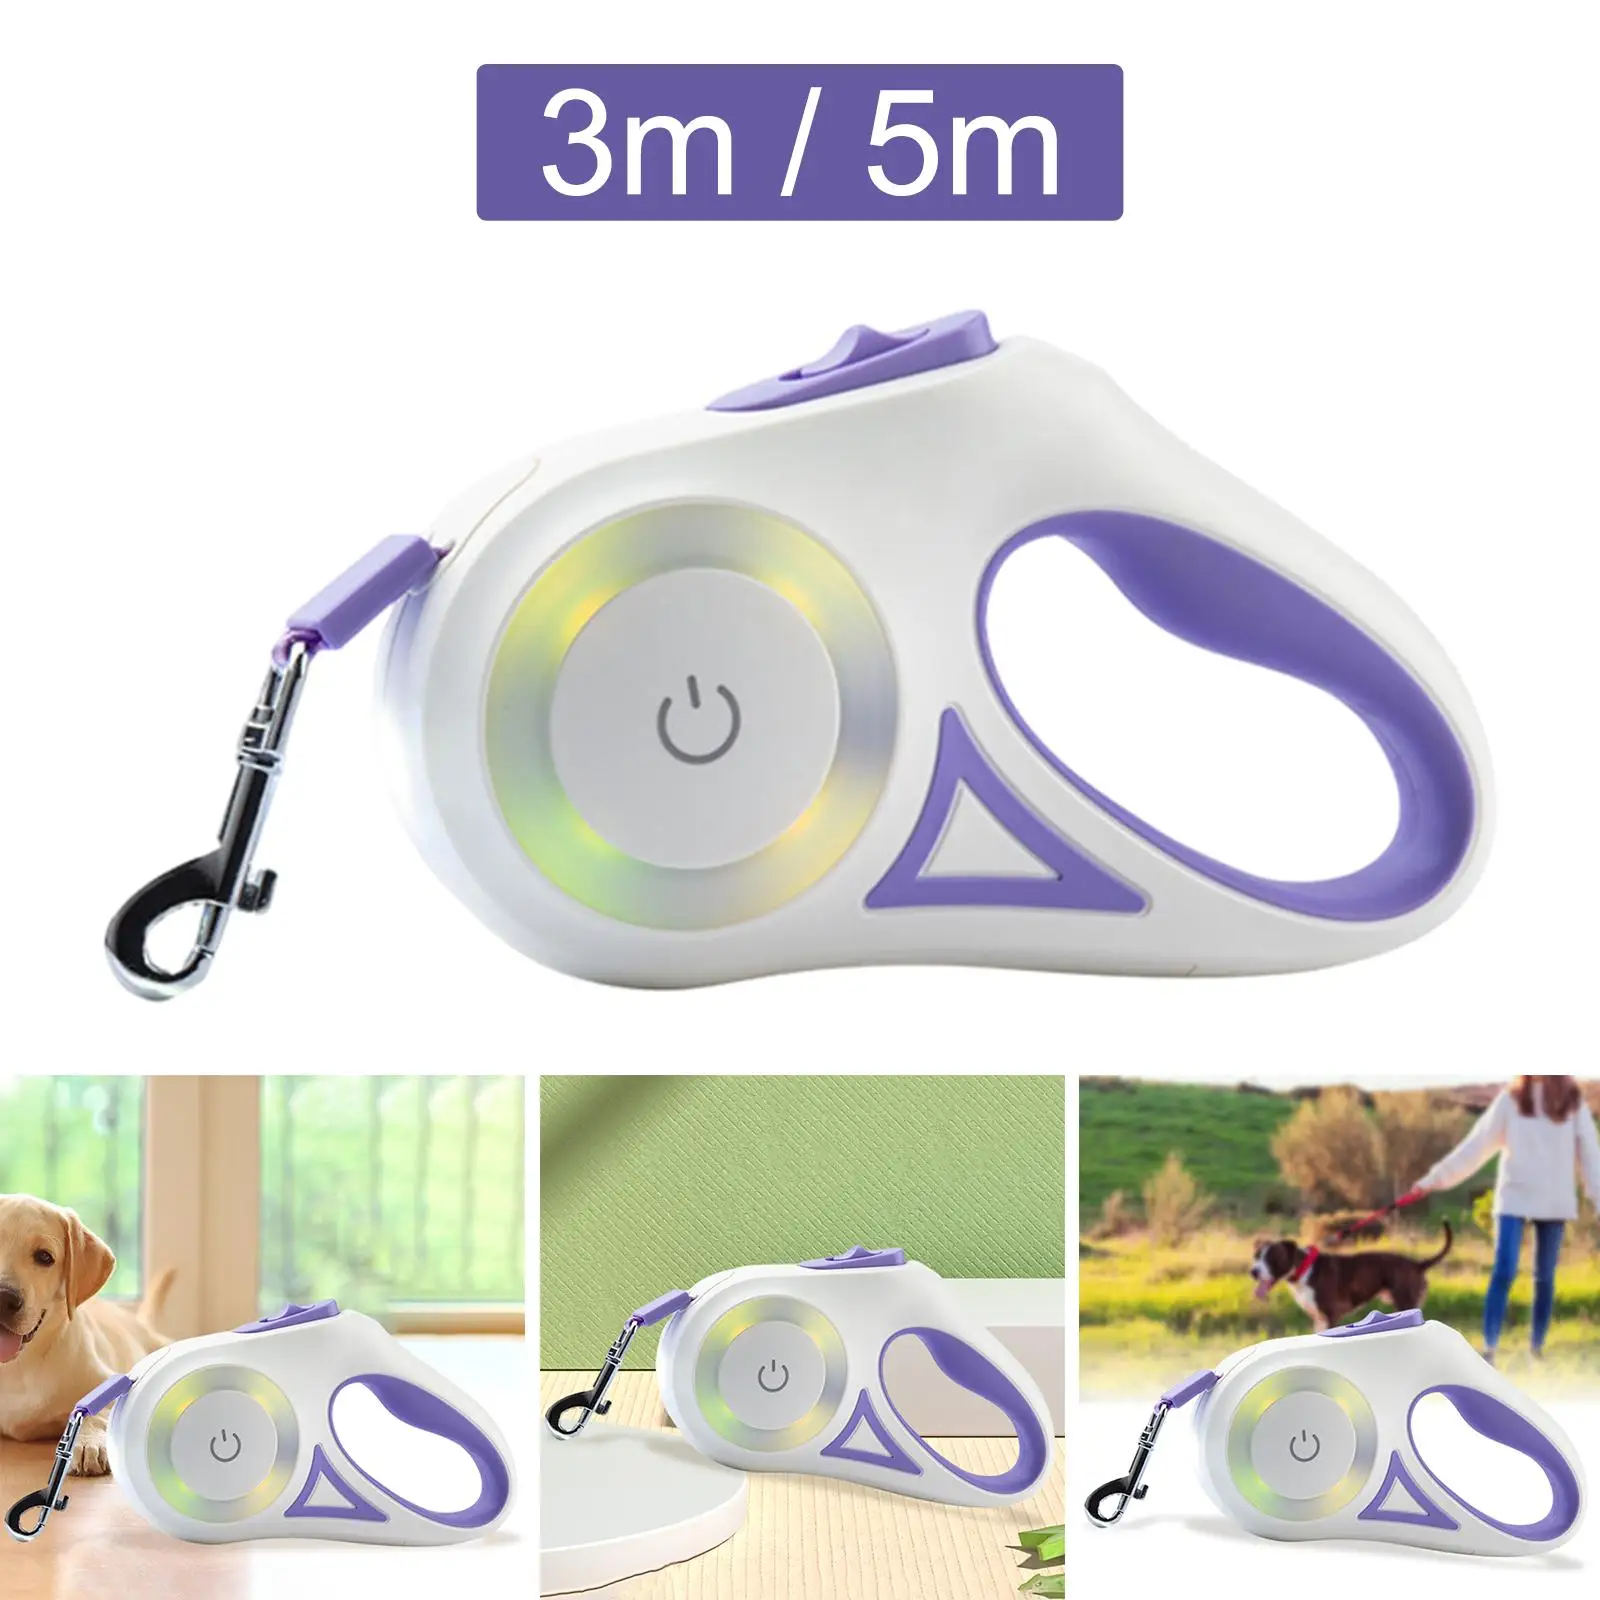 Retractable Dog Leash Traction Rope Automatic for Small Medium Large Dogs